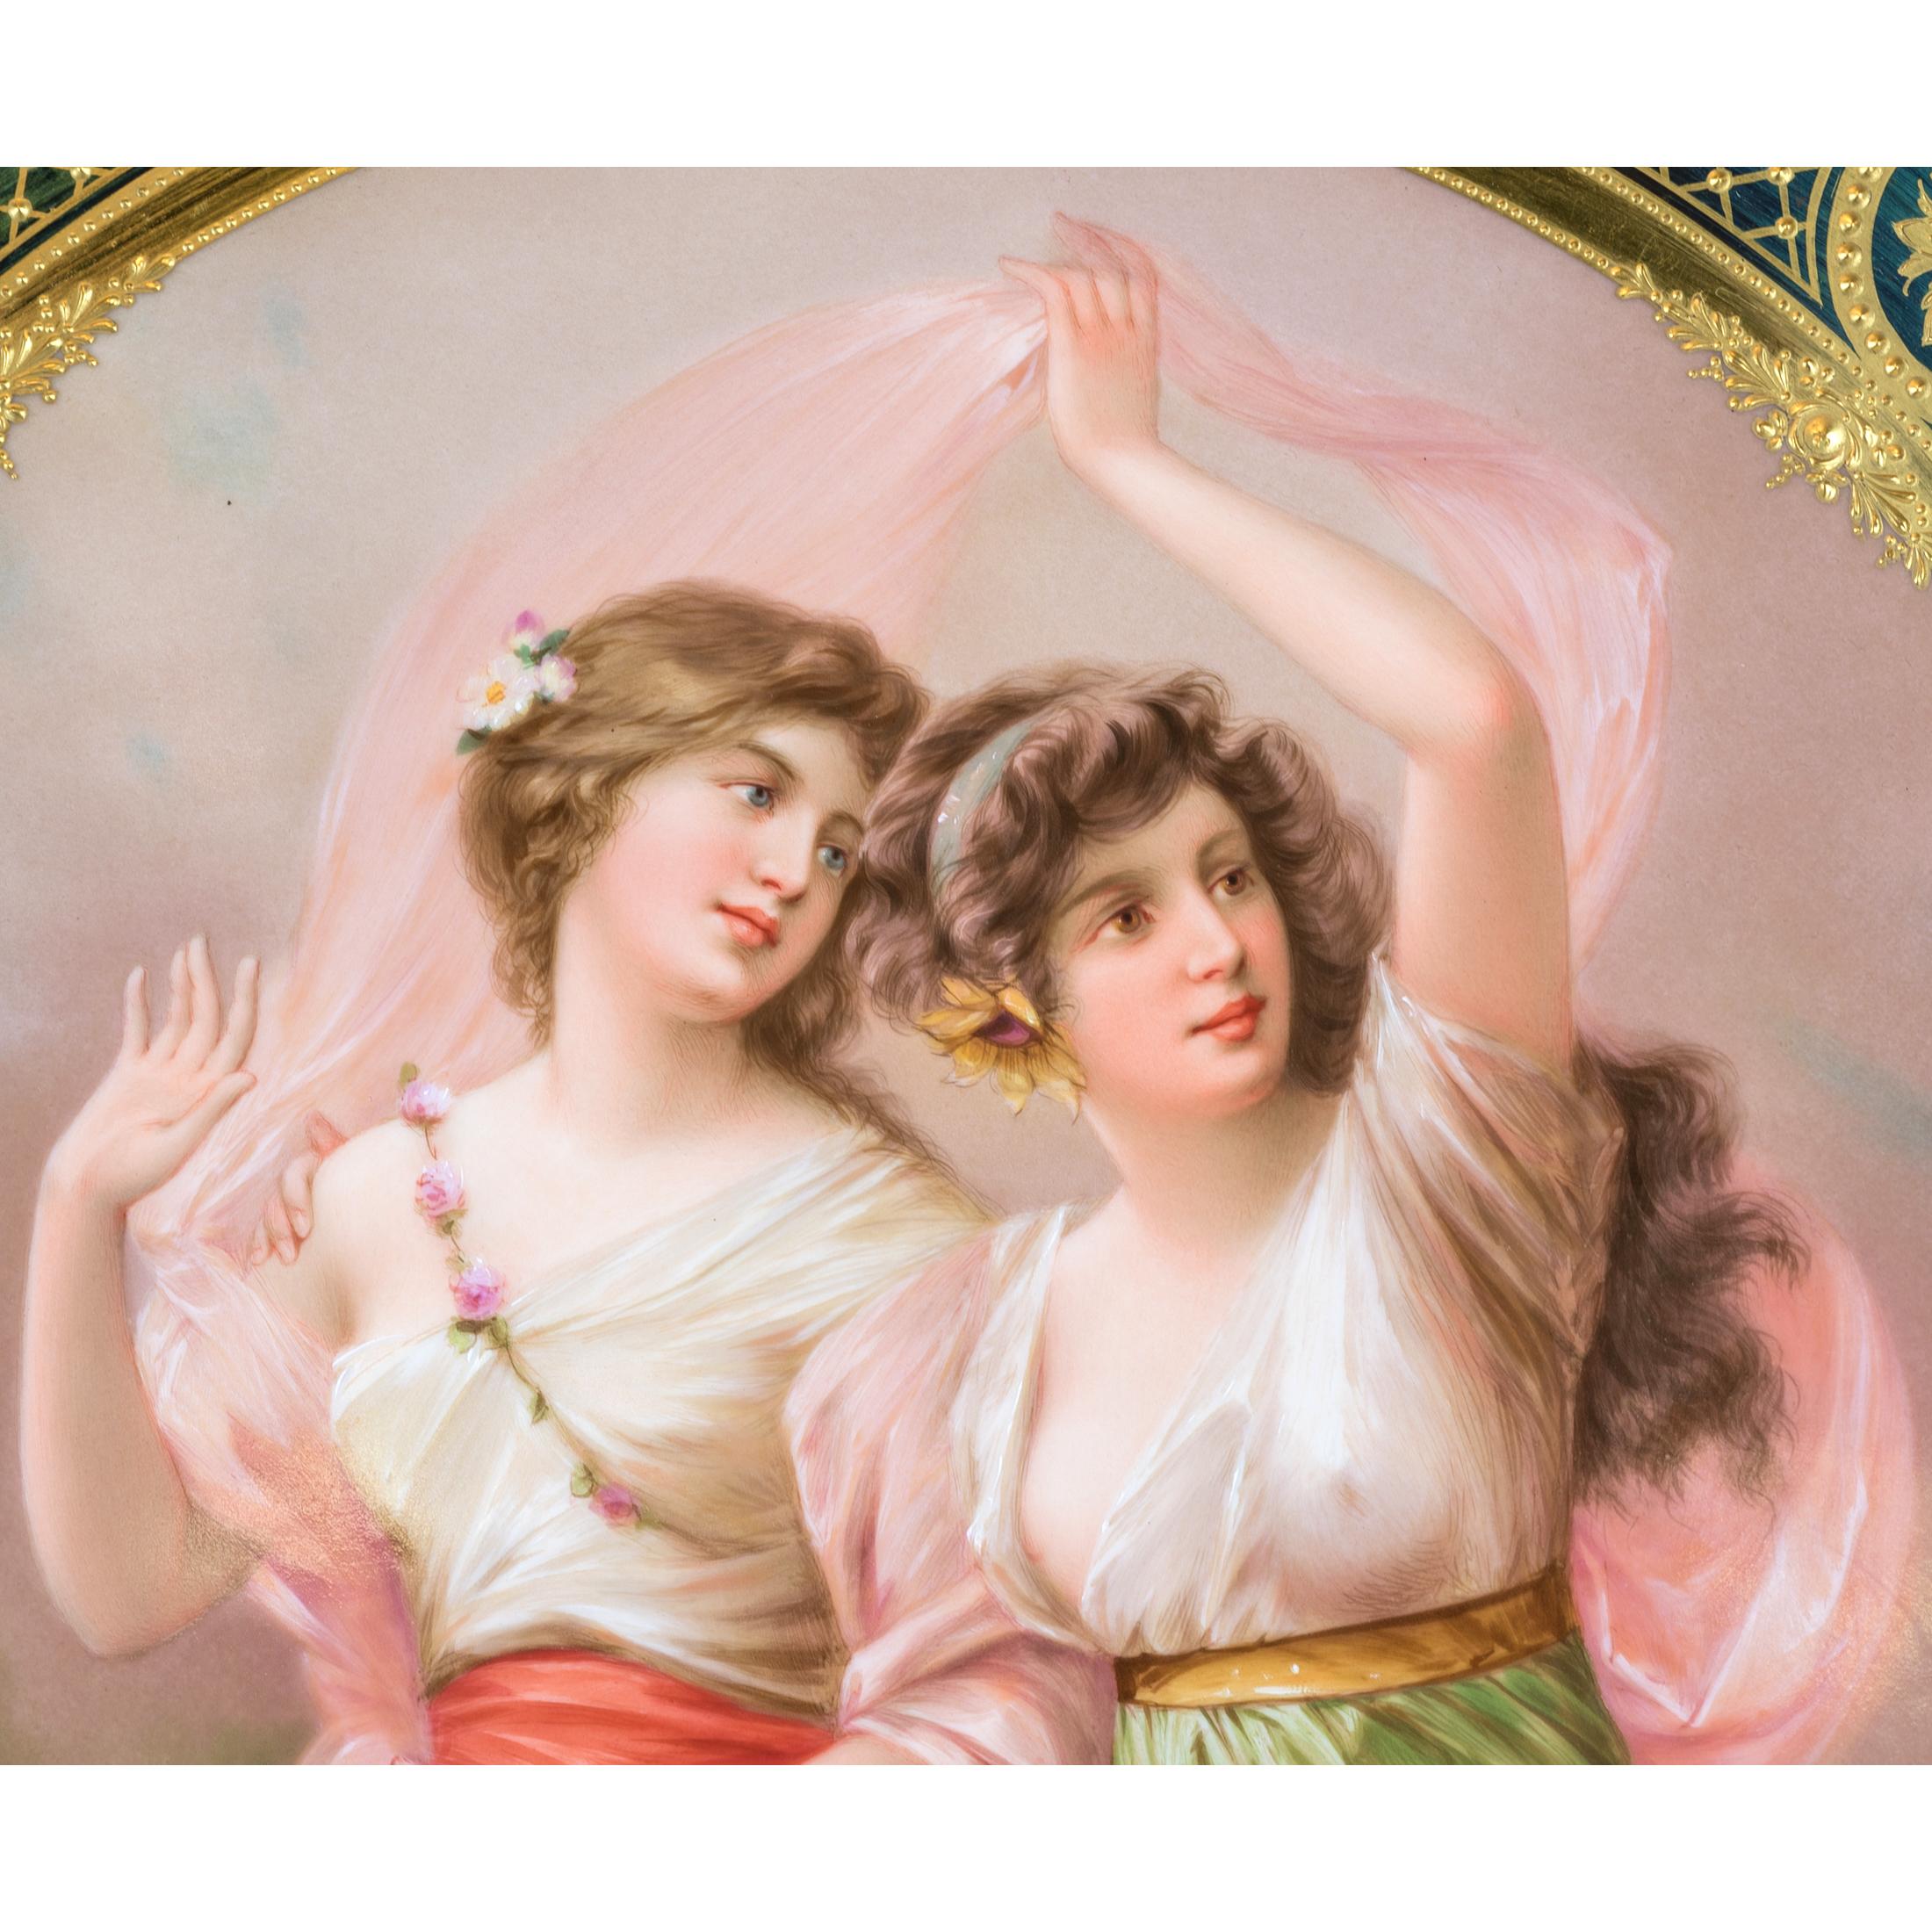 A rare and exquisite Berlin painted round porcelain plaque of two young beauties, impressed K.P.M., sceptre mark; signed Wagner.

Painter: Wagner 

Maker: K.P.M.

Origin: German
Date: Late 19th century
Dimension: 14 inches in diameter